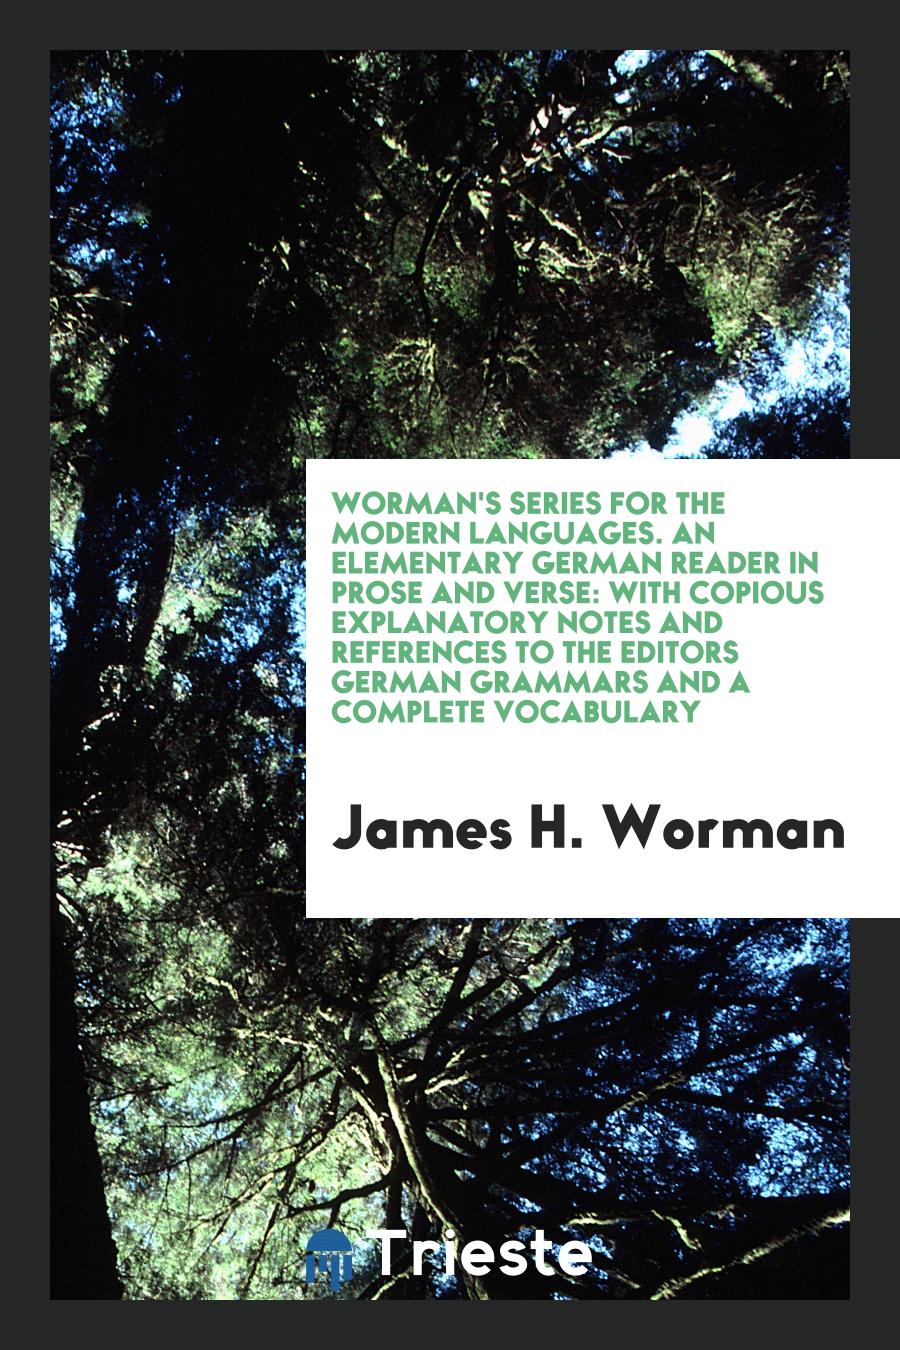 Worman's Series for the Modern Languages. An Elementary German Reader in Prose and Verse: With Copious Explanatory Notes and References to the Editors German Grammars and a Complete Vocabulary